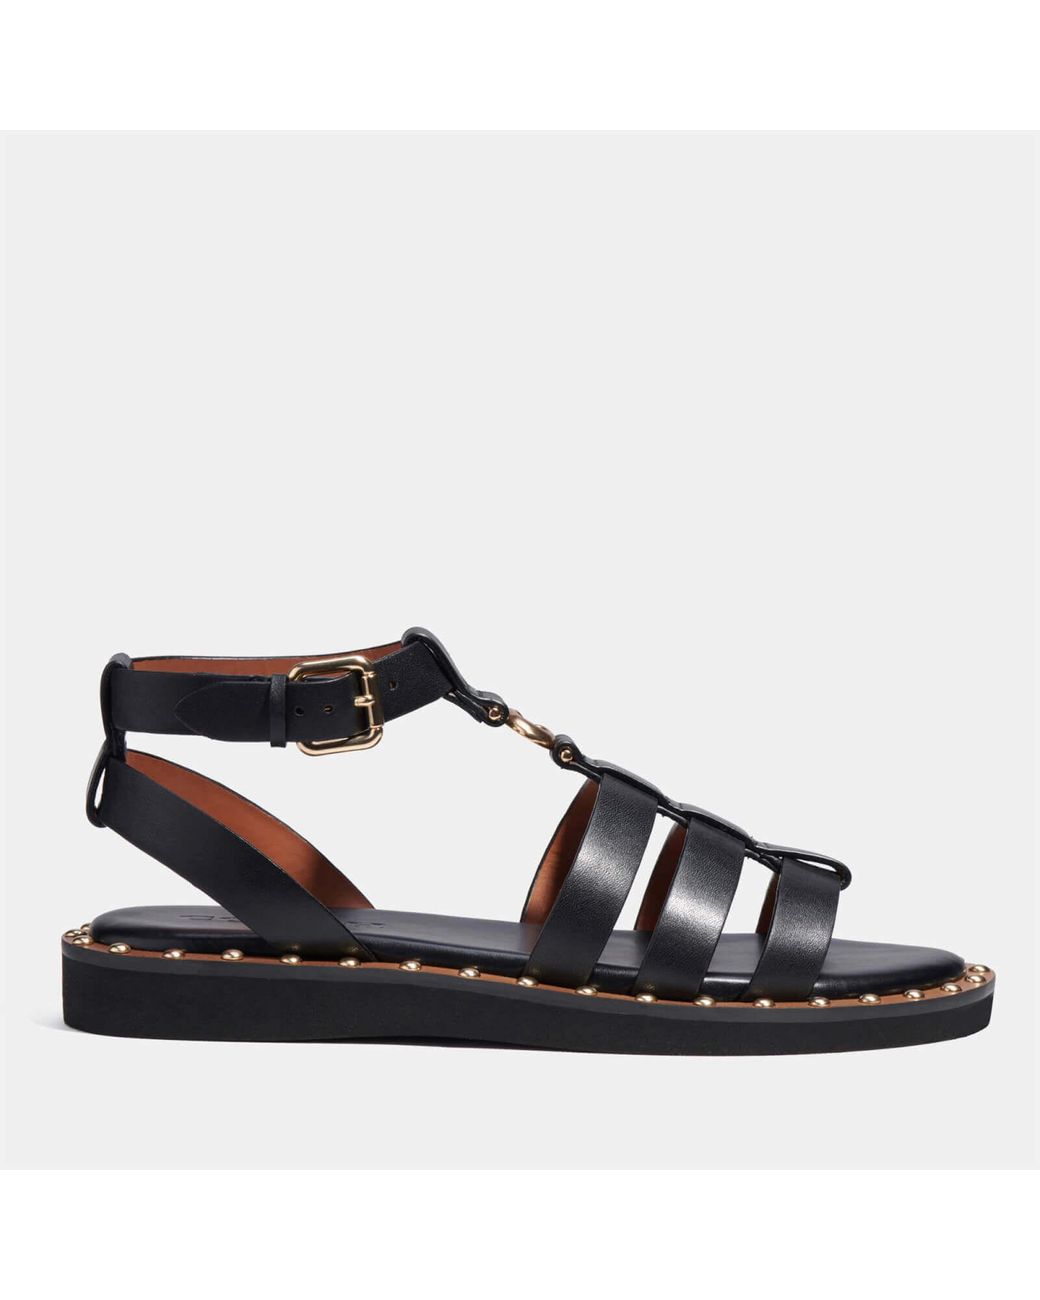 COACH Giselle Leather Sandals in Natural | Lyst Australia